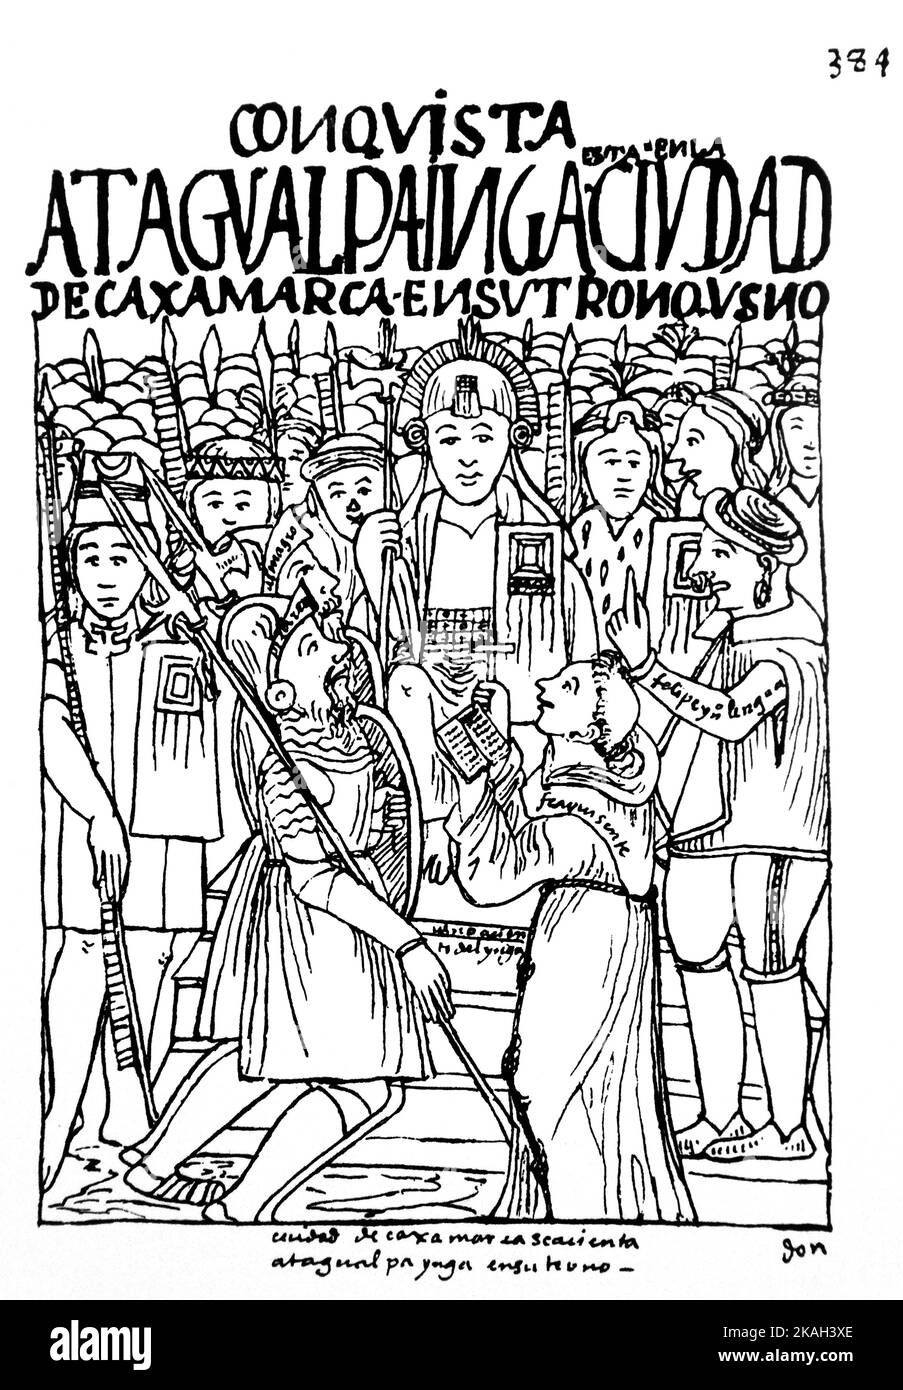 384.Diego De Almagro,Francisco Pizarro,Friar Vicente de Valverde kneeling before Atahualpa Inca at Cajamarca,with the Indian Felipillo as interpreter.by Felipe Guamán Poma de Ayala (1535- 1616).Guamán Poma tells the story how spain built the most extensive colonial empire in the 'New World'' and conquest from an Andean perspective,in particular the ill-treatment of the natives of the Andes by the Spaniards,called the Nueva corónica y buen gobierno. Stock Photo